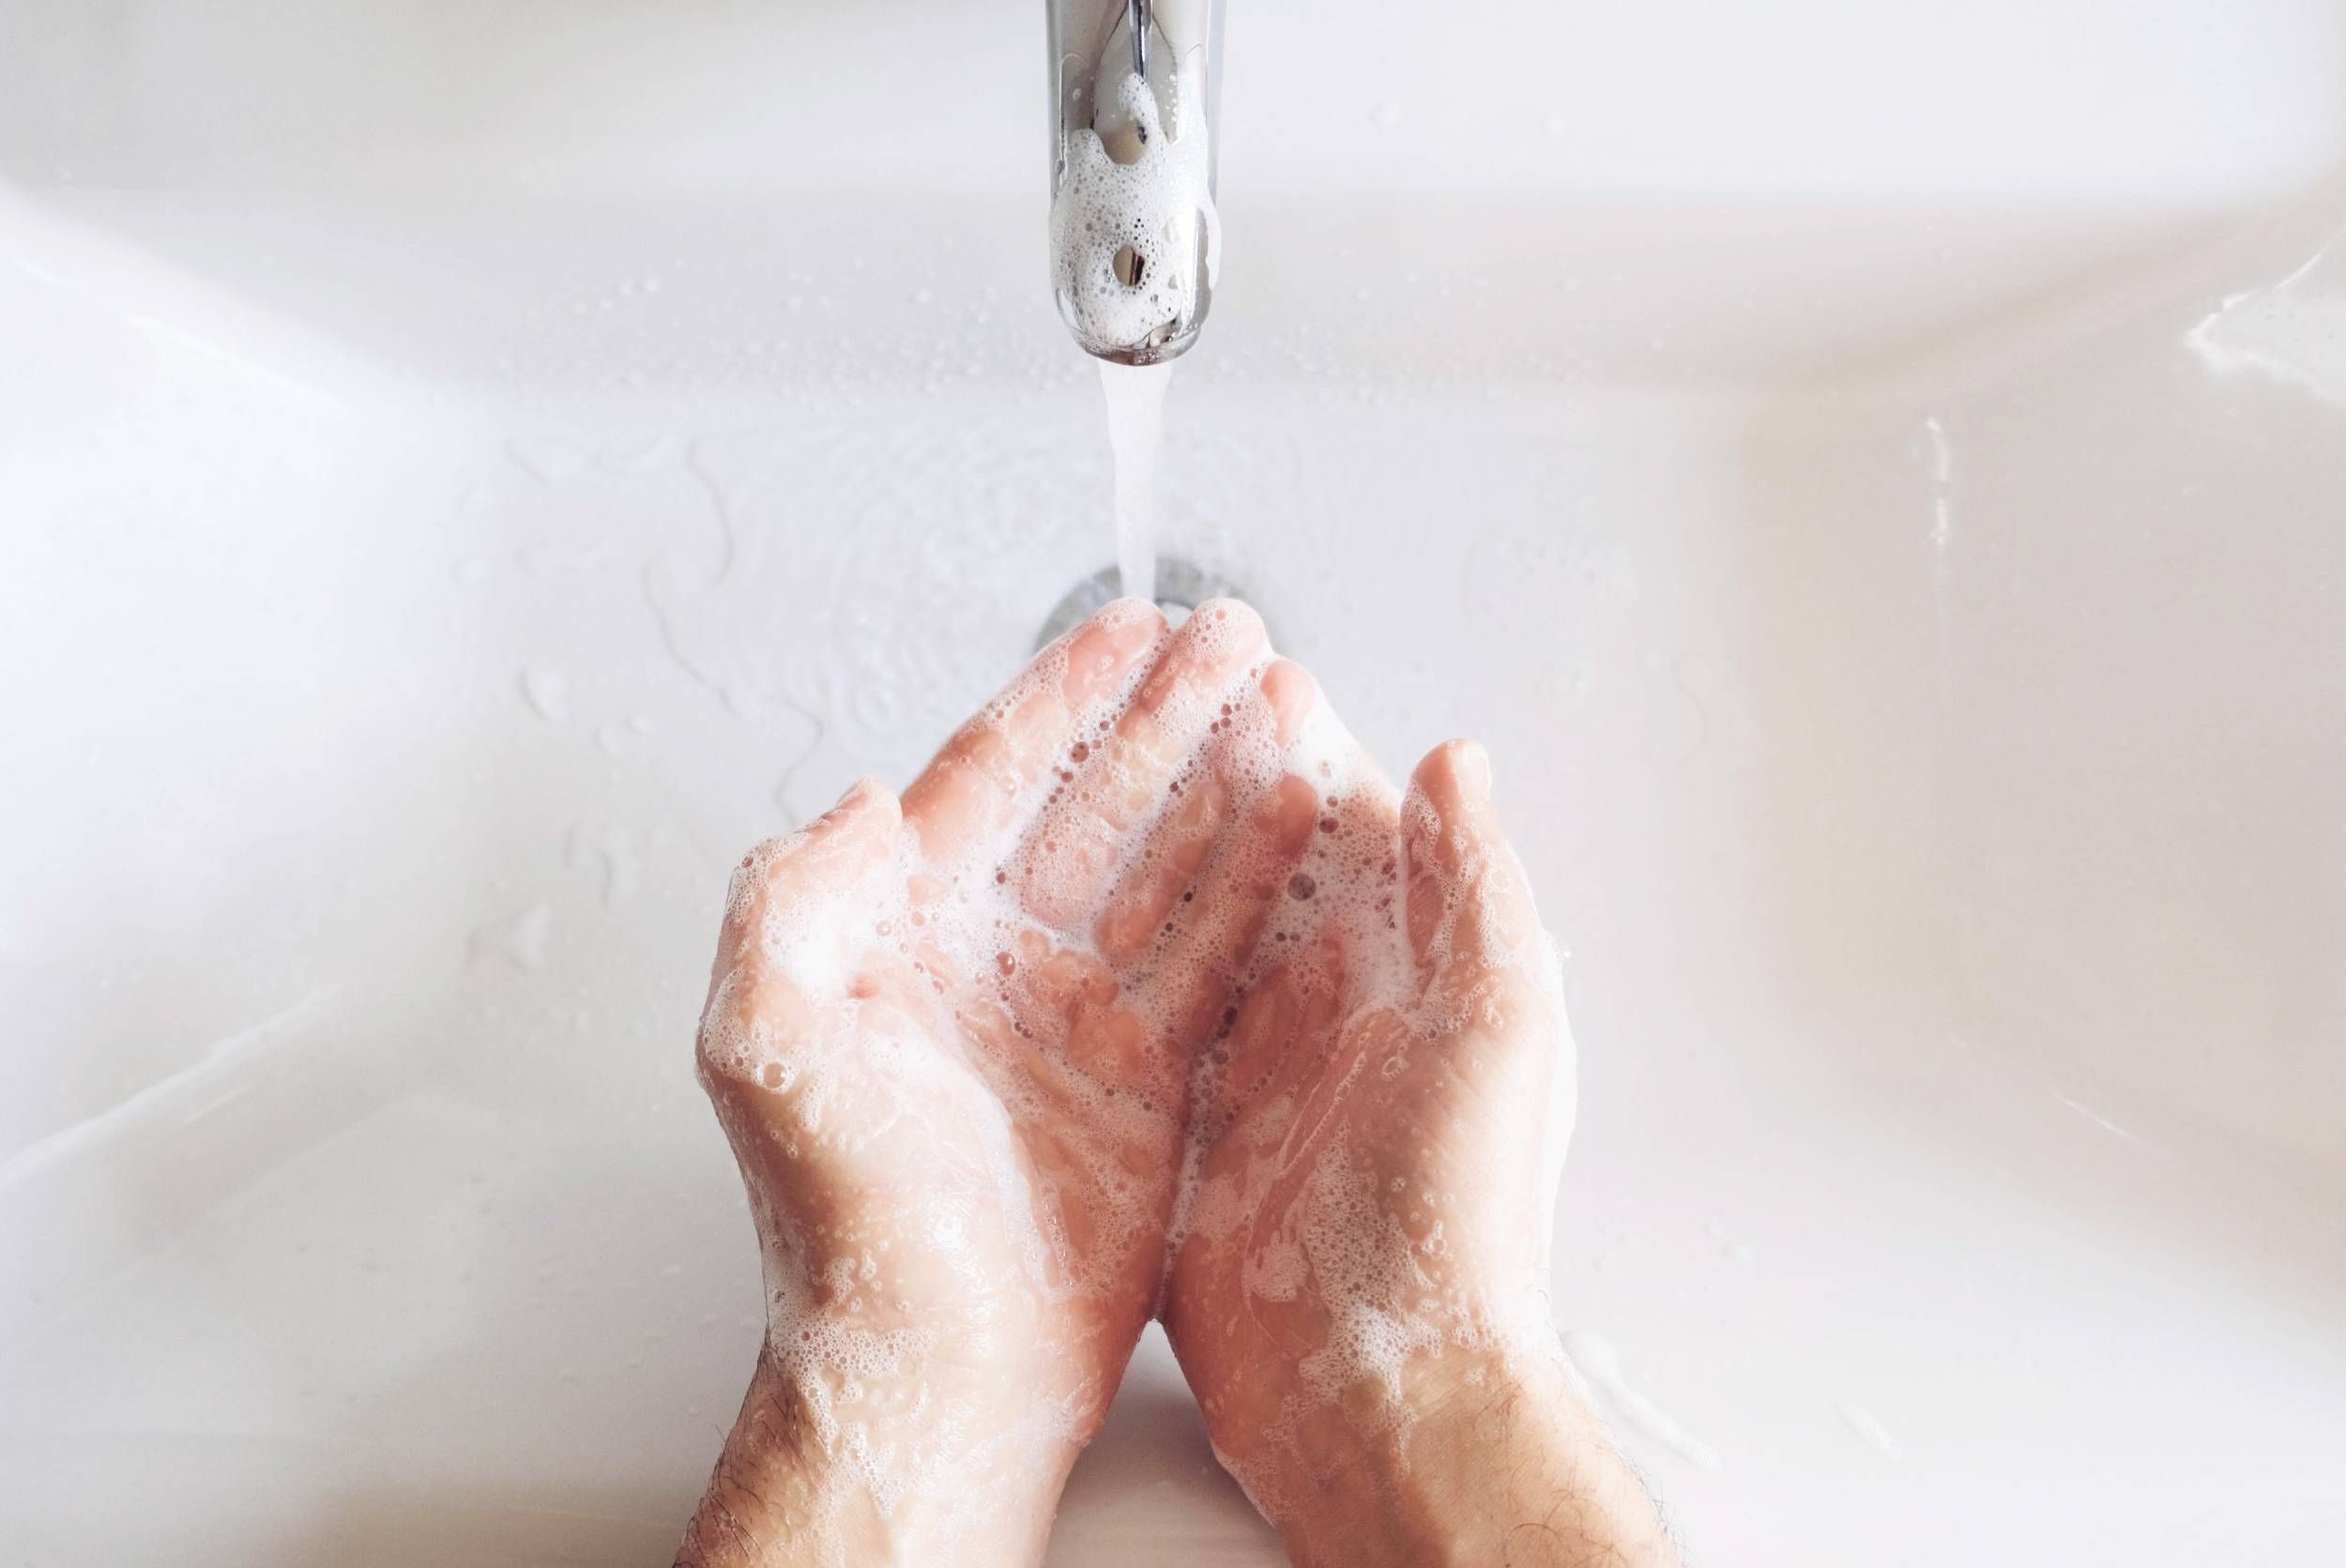 How Hygiene and Washing Hands Is Important for Eye Health